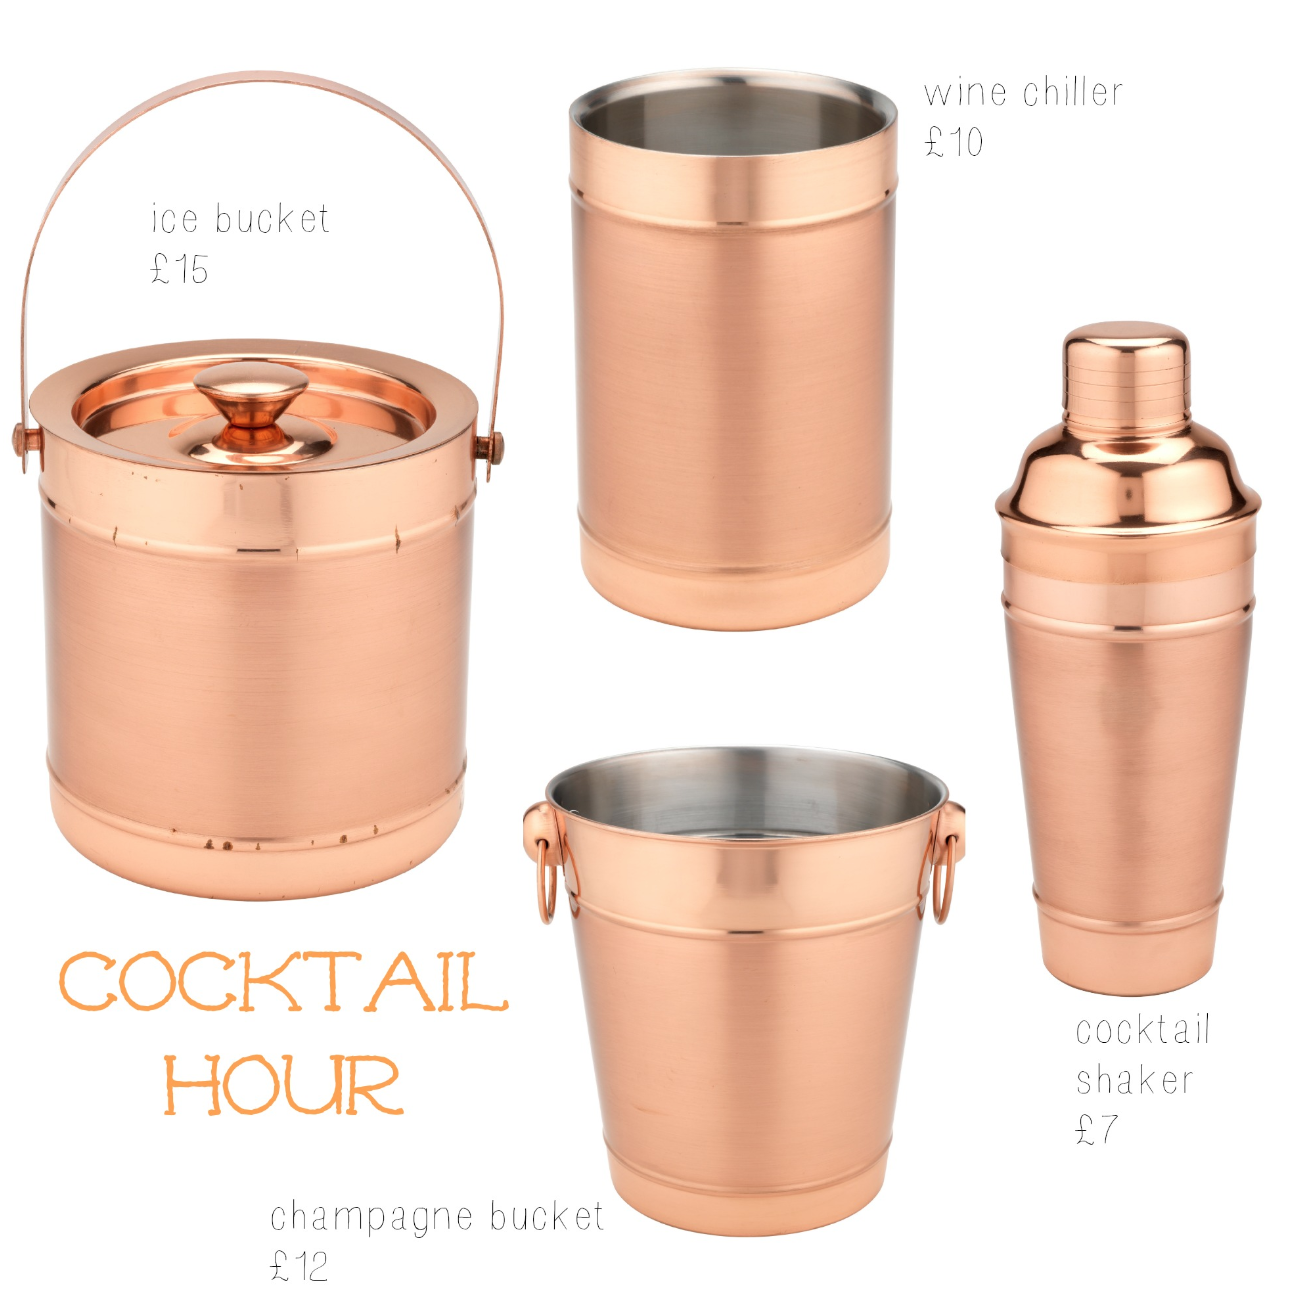 mamasVIB | V. I. BUYS: Copper Crush: 12 great way to instantly update your home | copper | rose gold | home decor | home buys | mamasVIB | H&M home | bar cart | gold home buys | sainsburys | marks and spec'er | m&S | cushion | copper cushions | storage baskets | chic home buys | hubs 100 | home buys | interiors | cheap home | decorating | interior | shopping